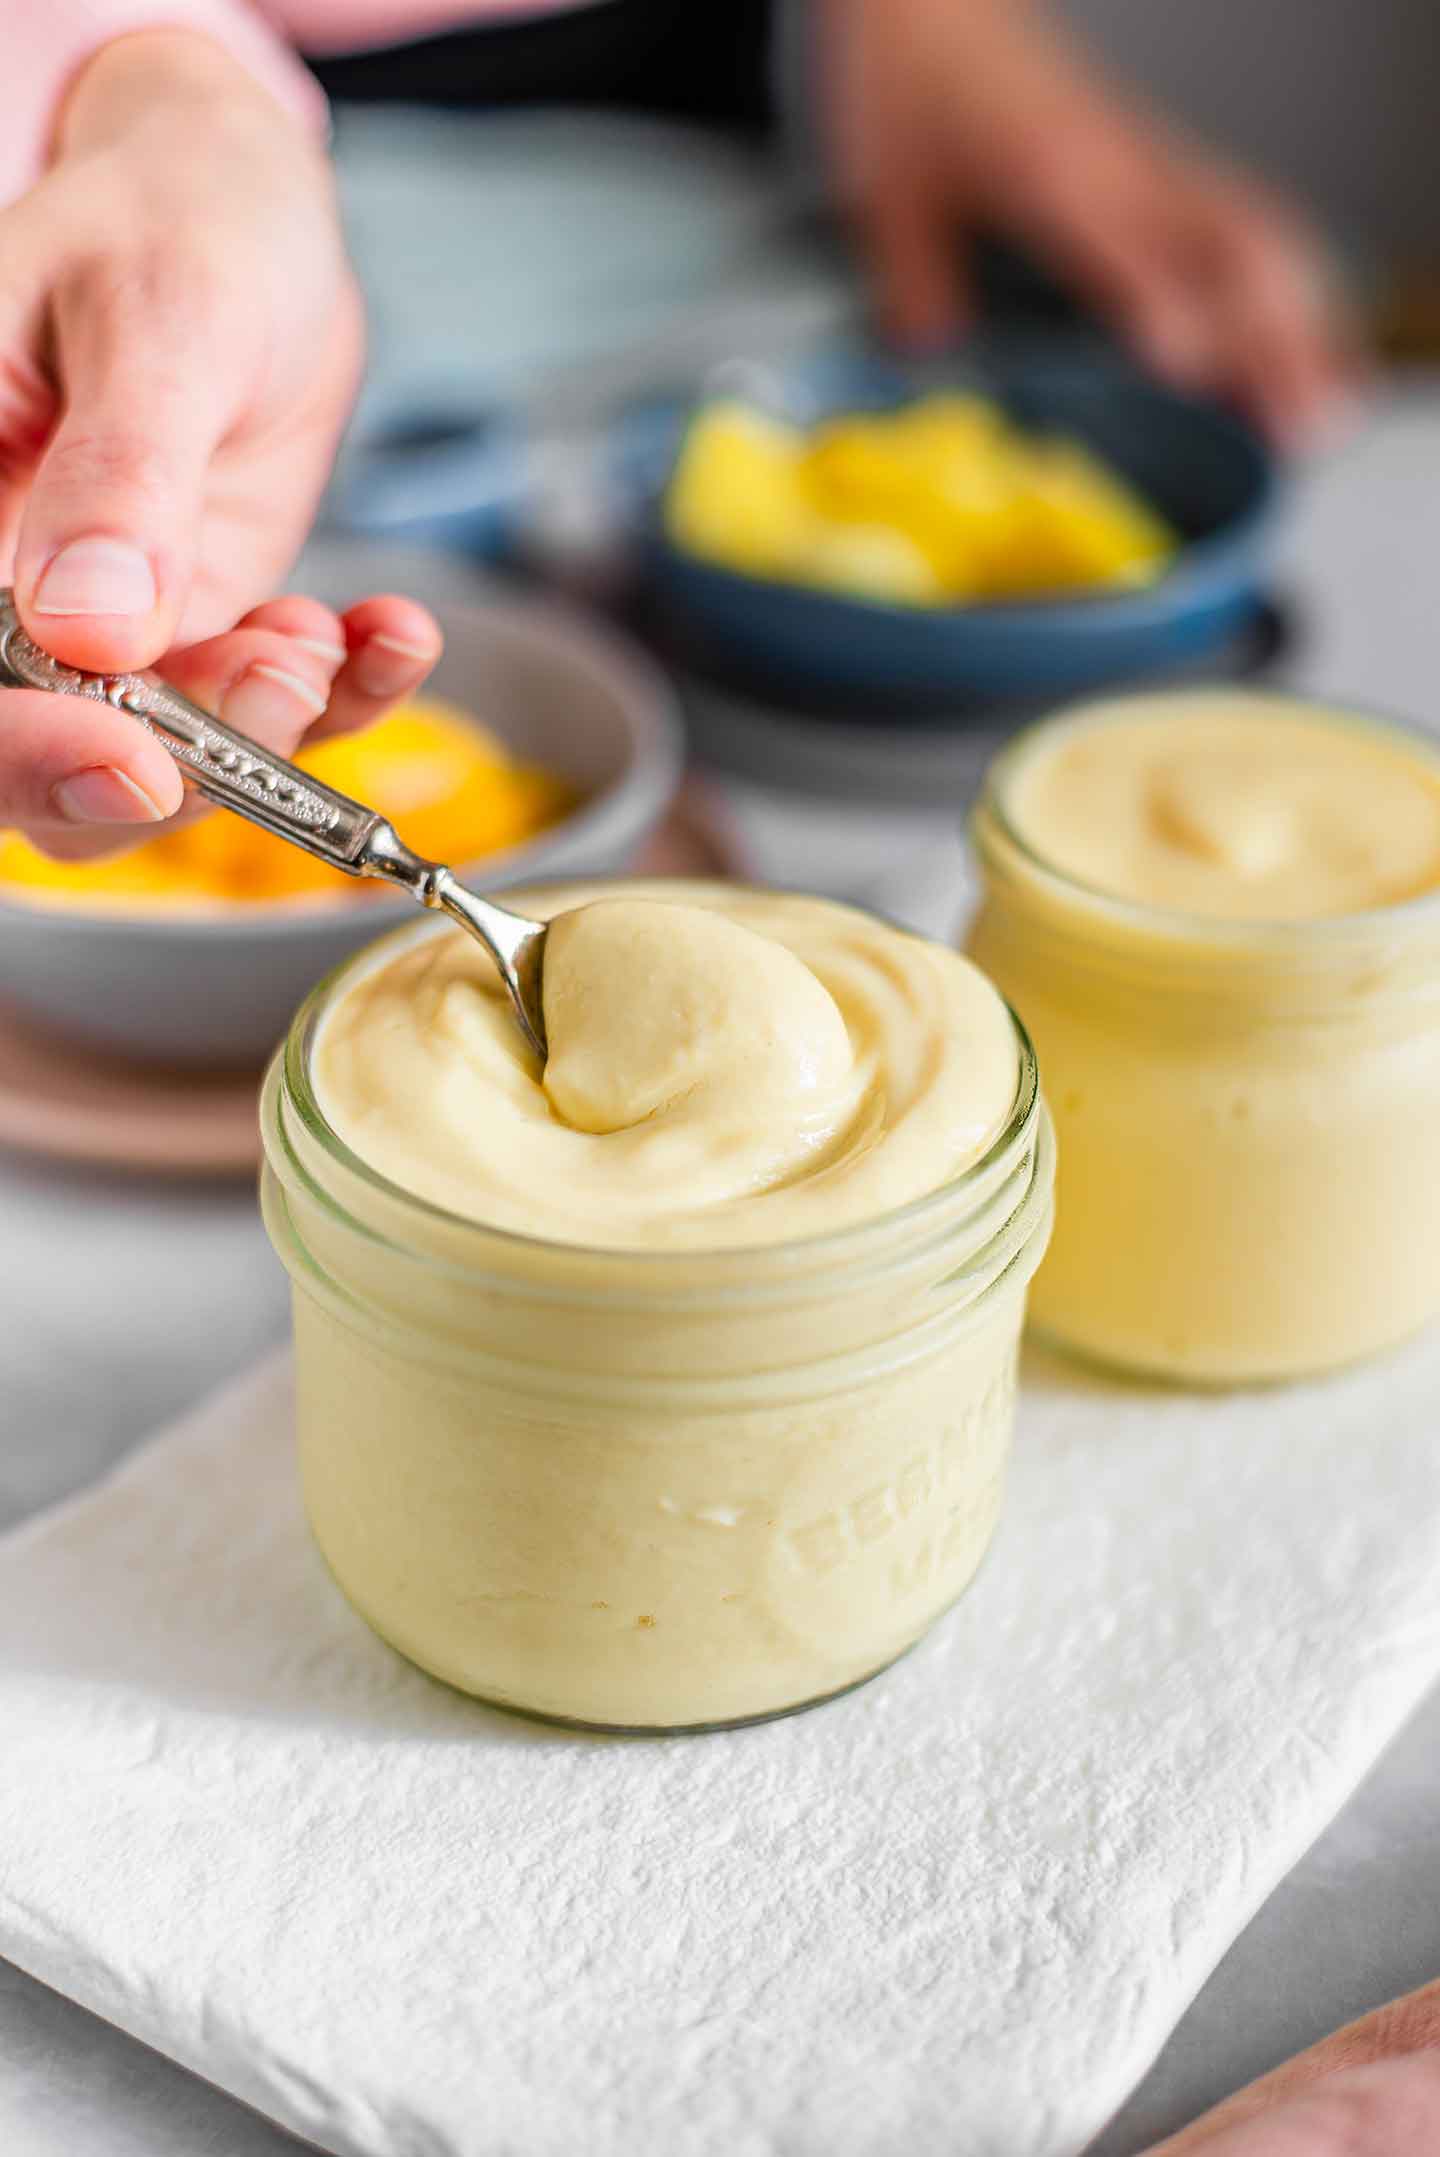 Side view of a hand dipping a spoon into thick tofu yogurt. Frozen mango and pineapple are in the background as is another jar of thinner yogurt.